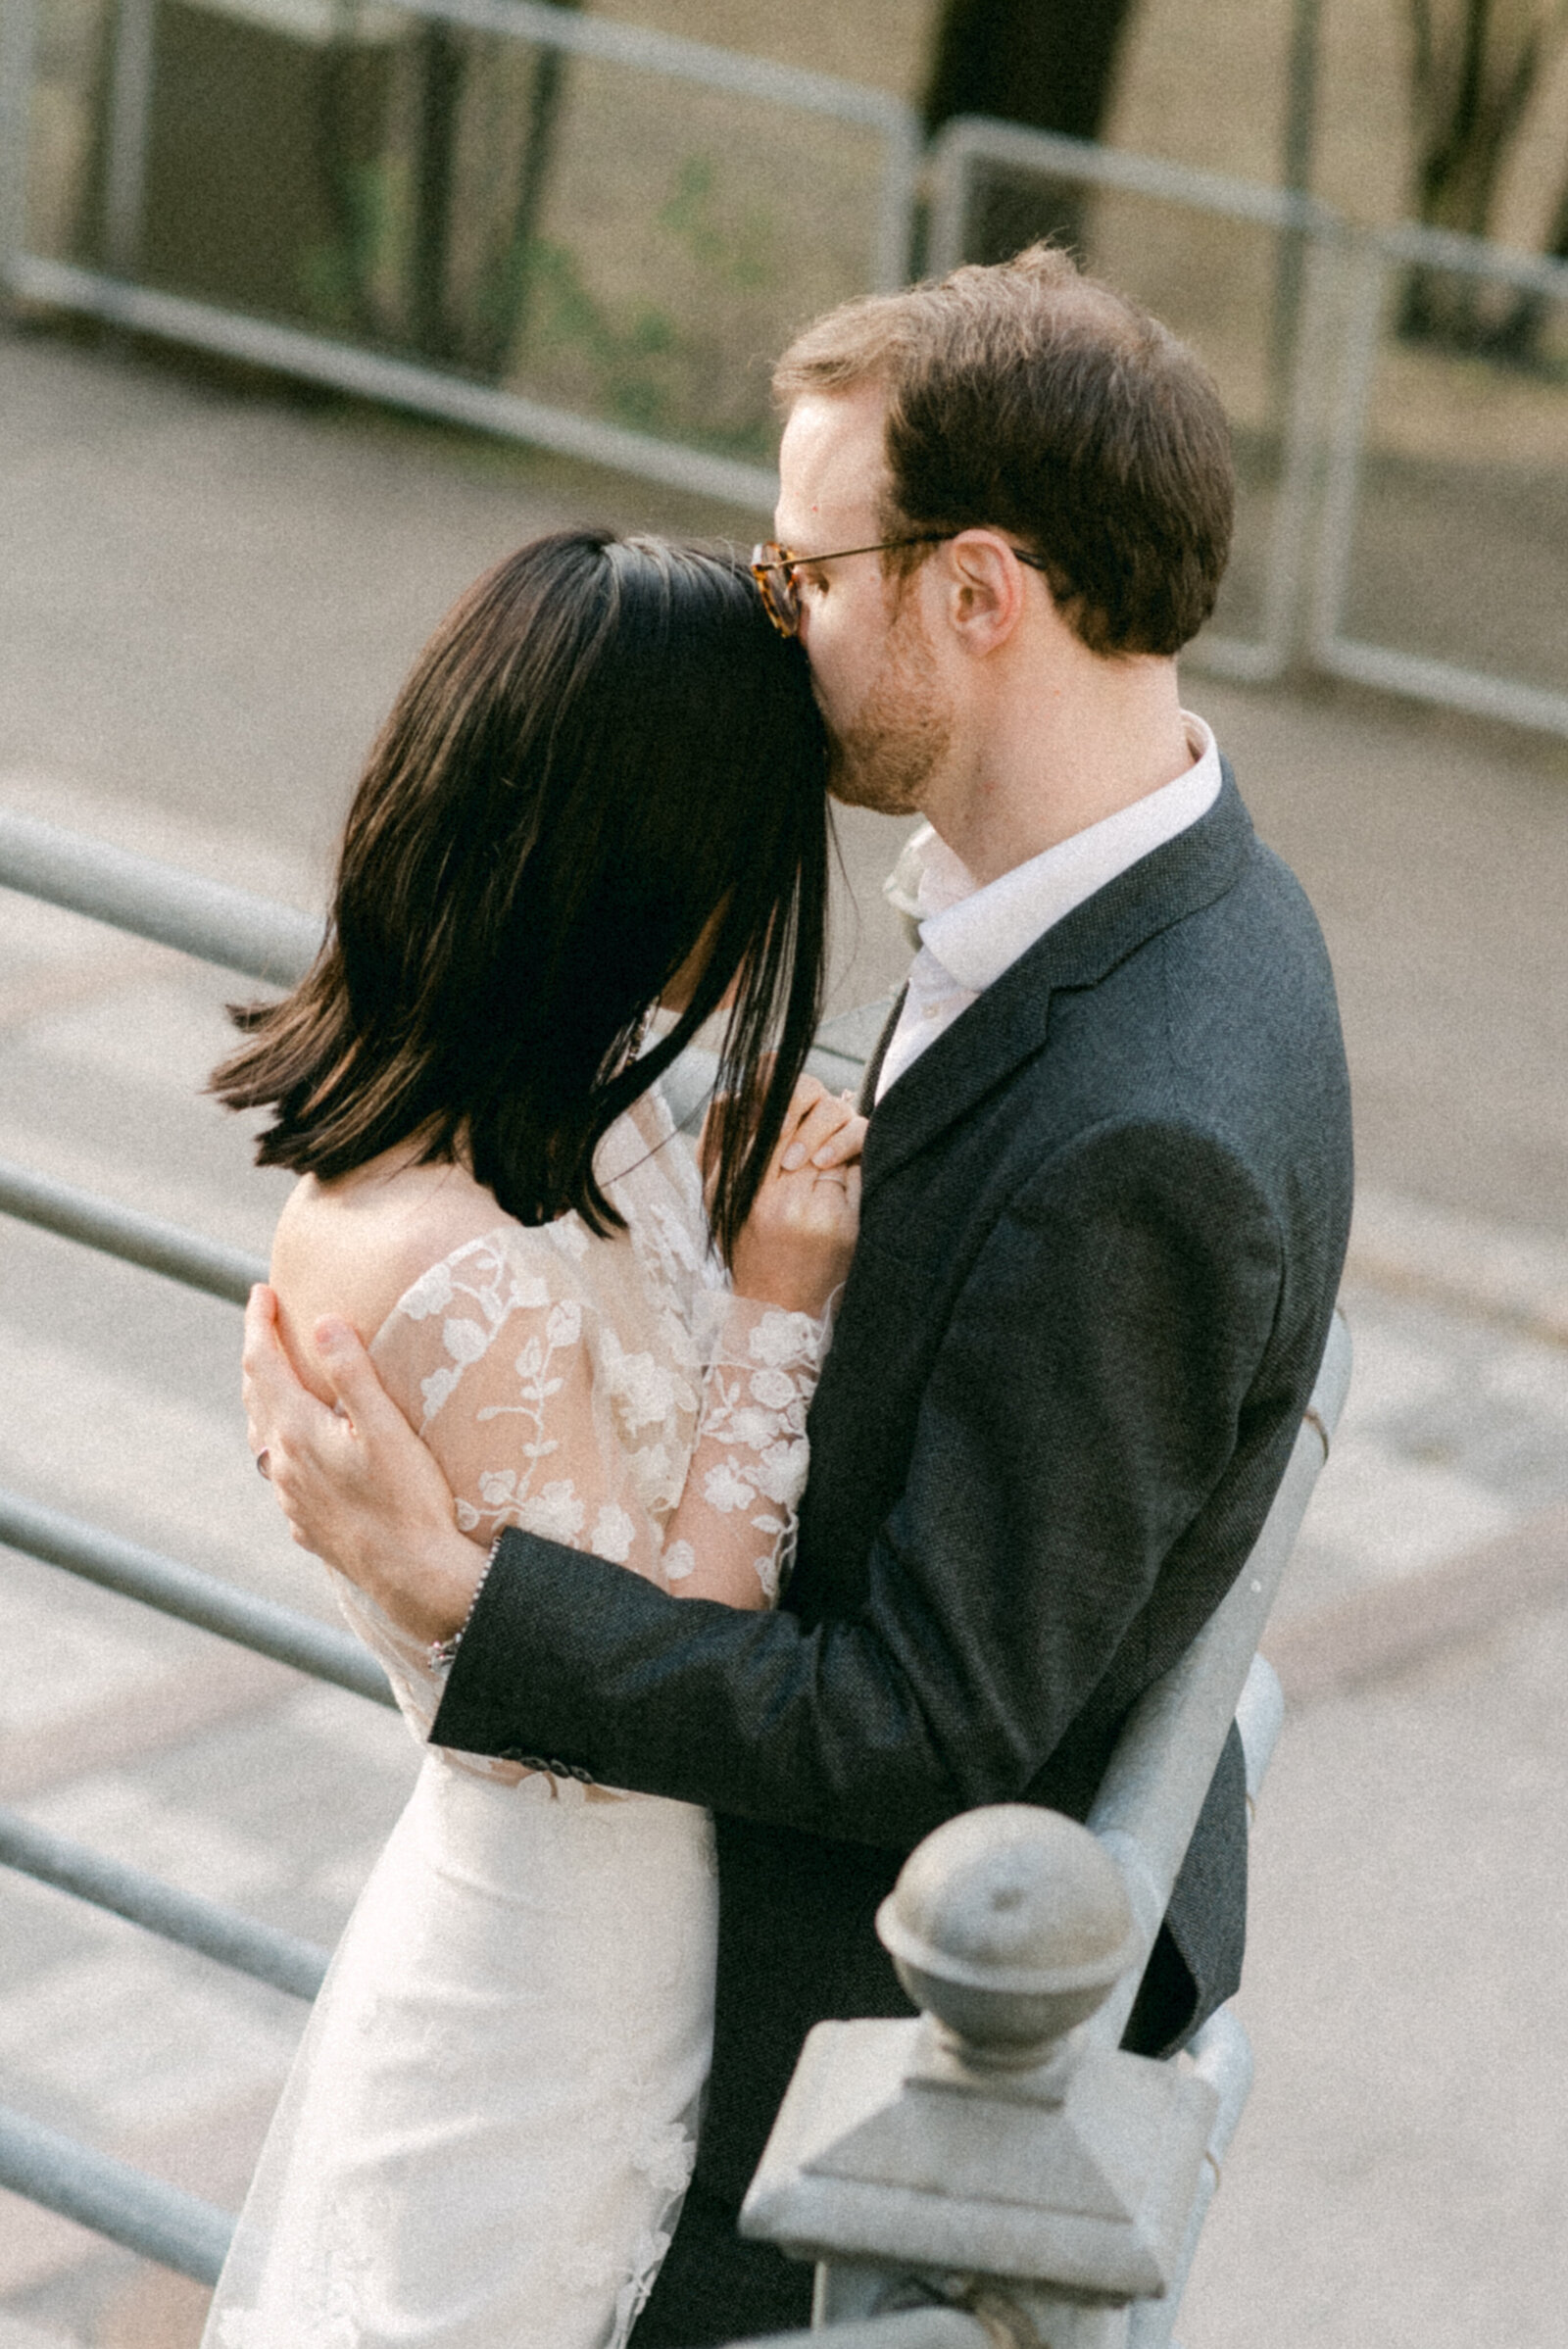 Bride and groom hugging in  a romantic image photographed on the streets of Helsinki by the Finnish wedding photographer Hannika Gabrielsson.